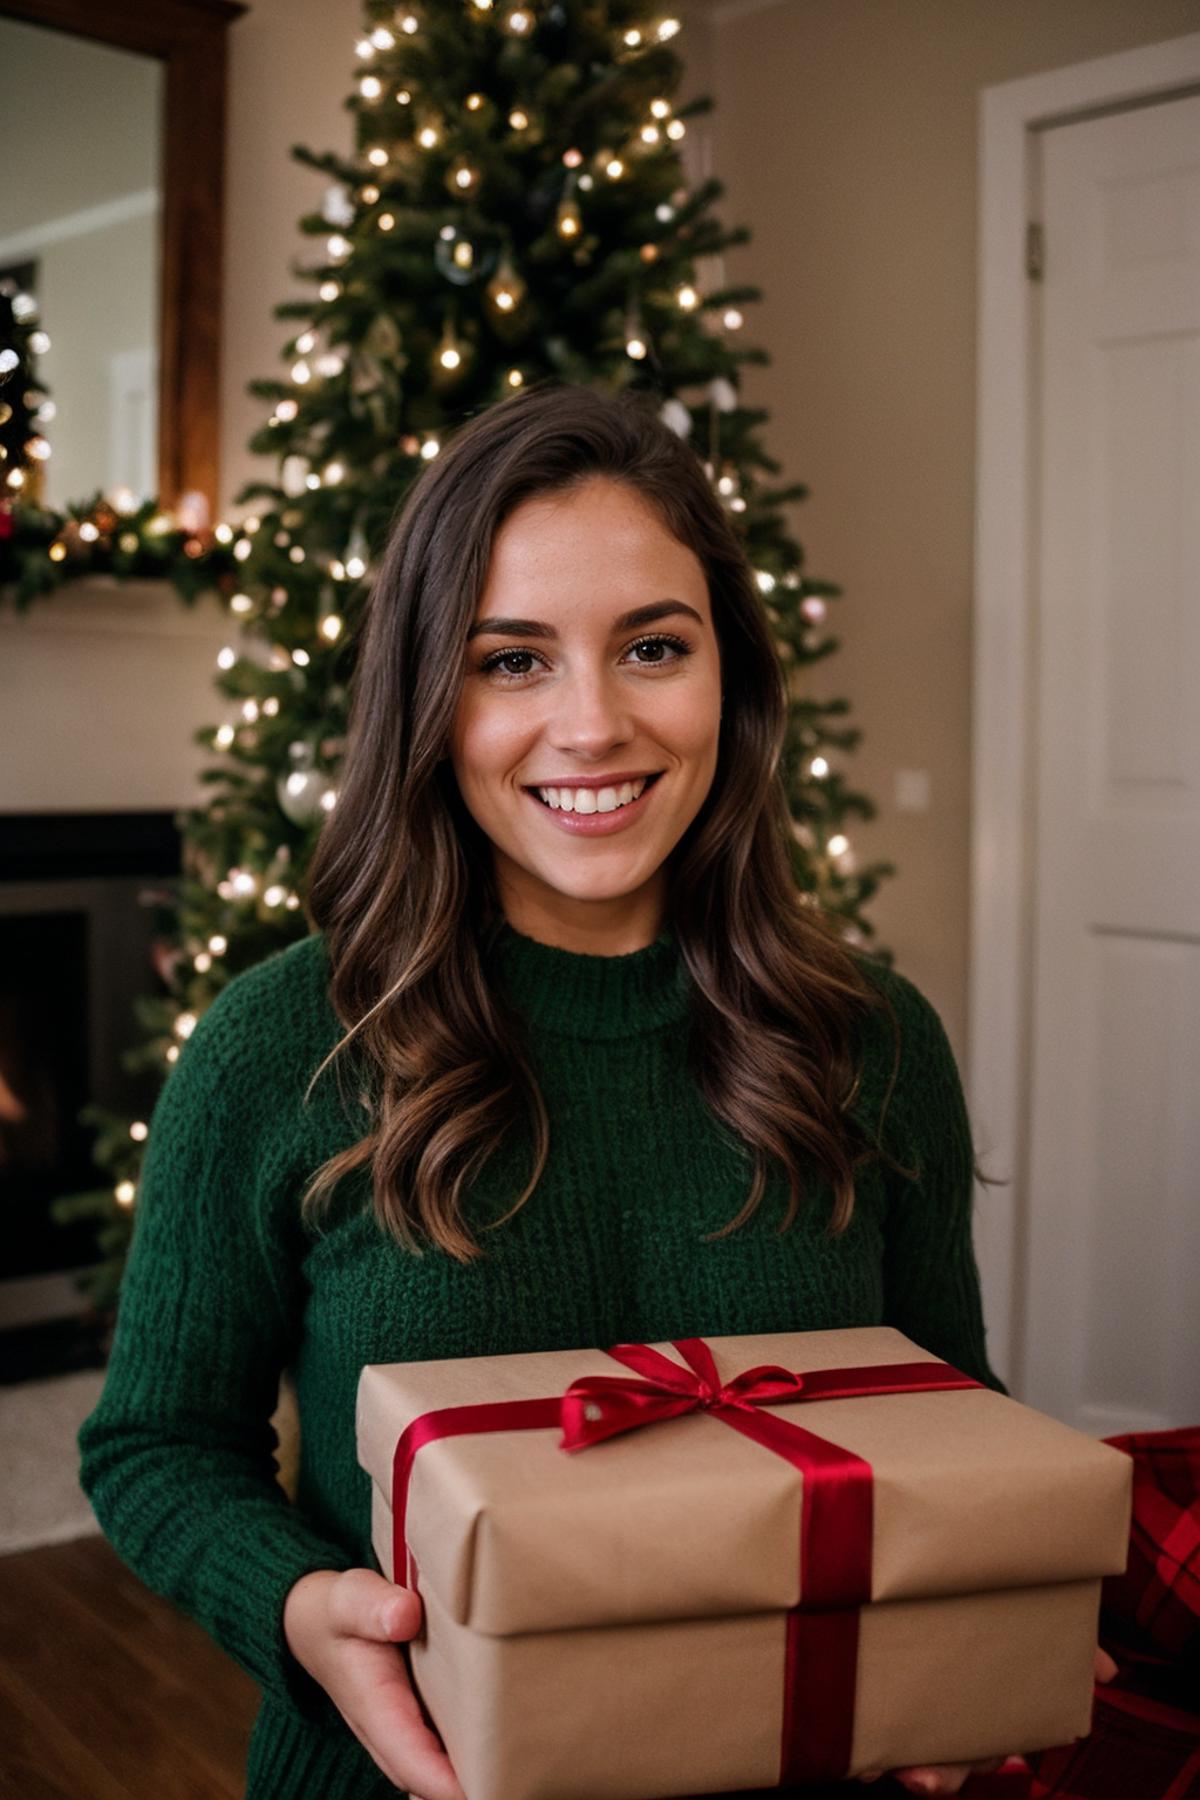 Smiling Woman Holding Brown Gift Box in Front of Christmas Tree